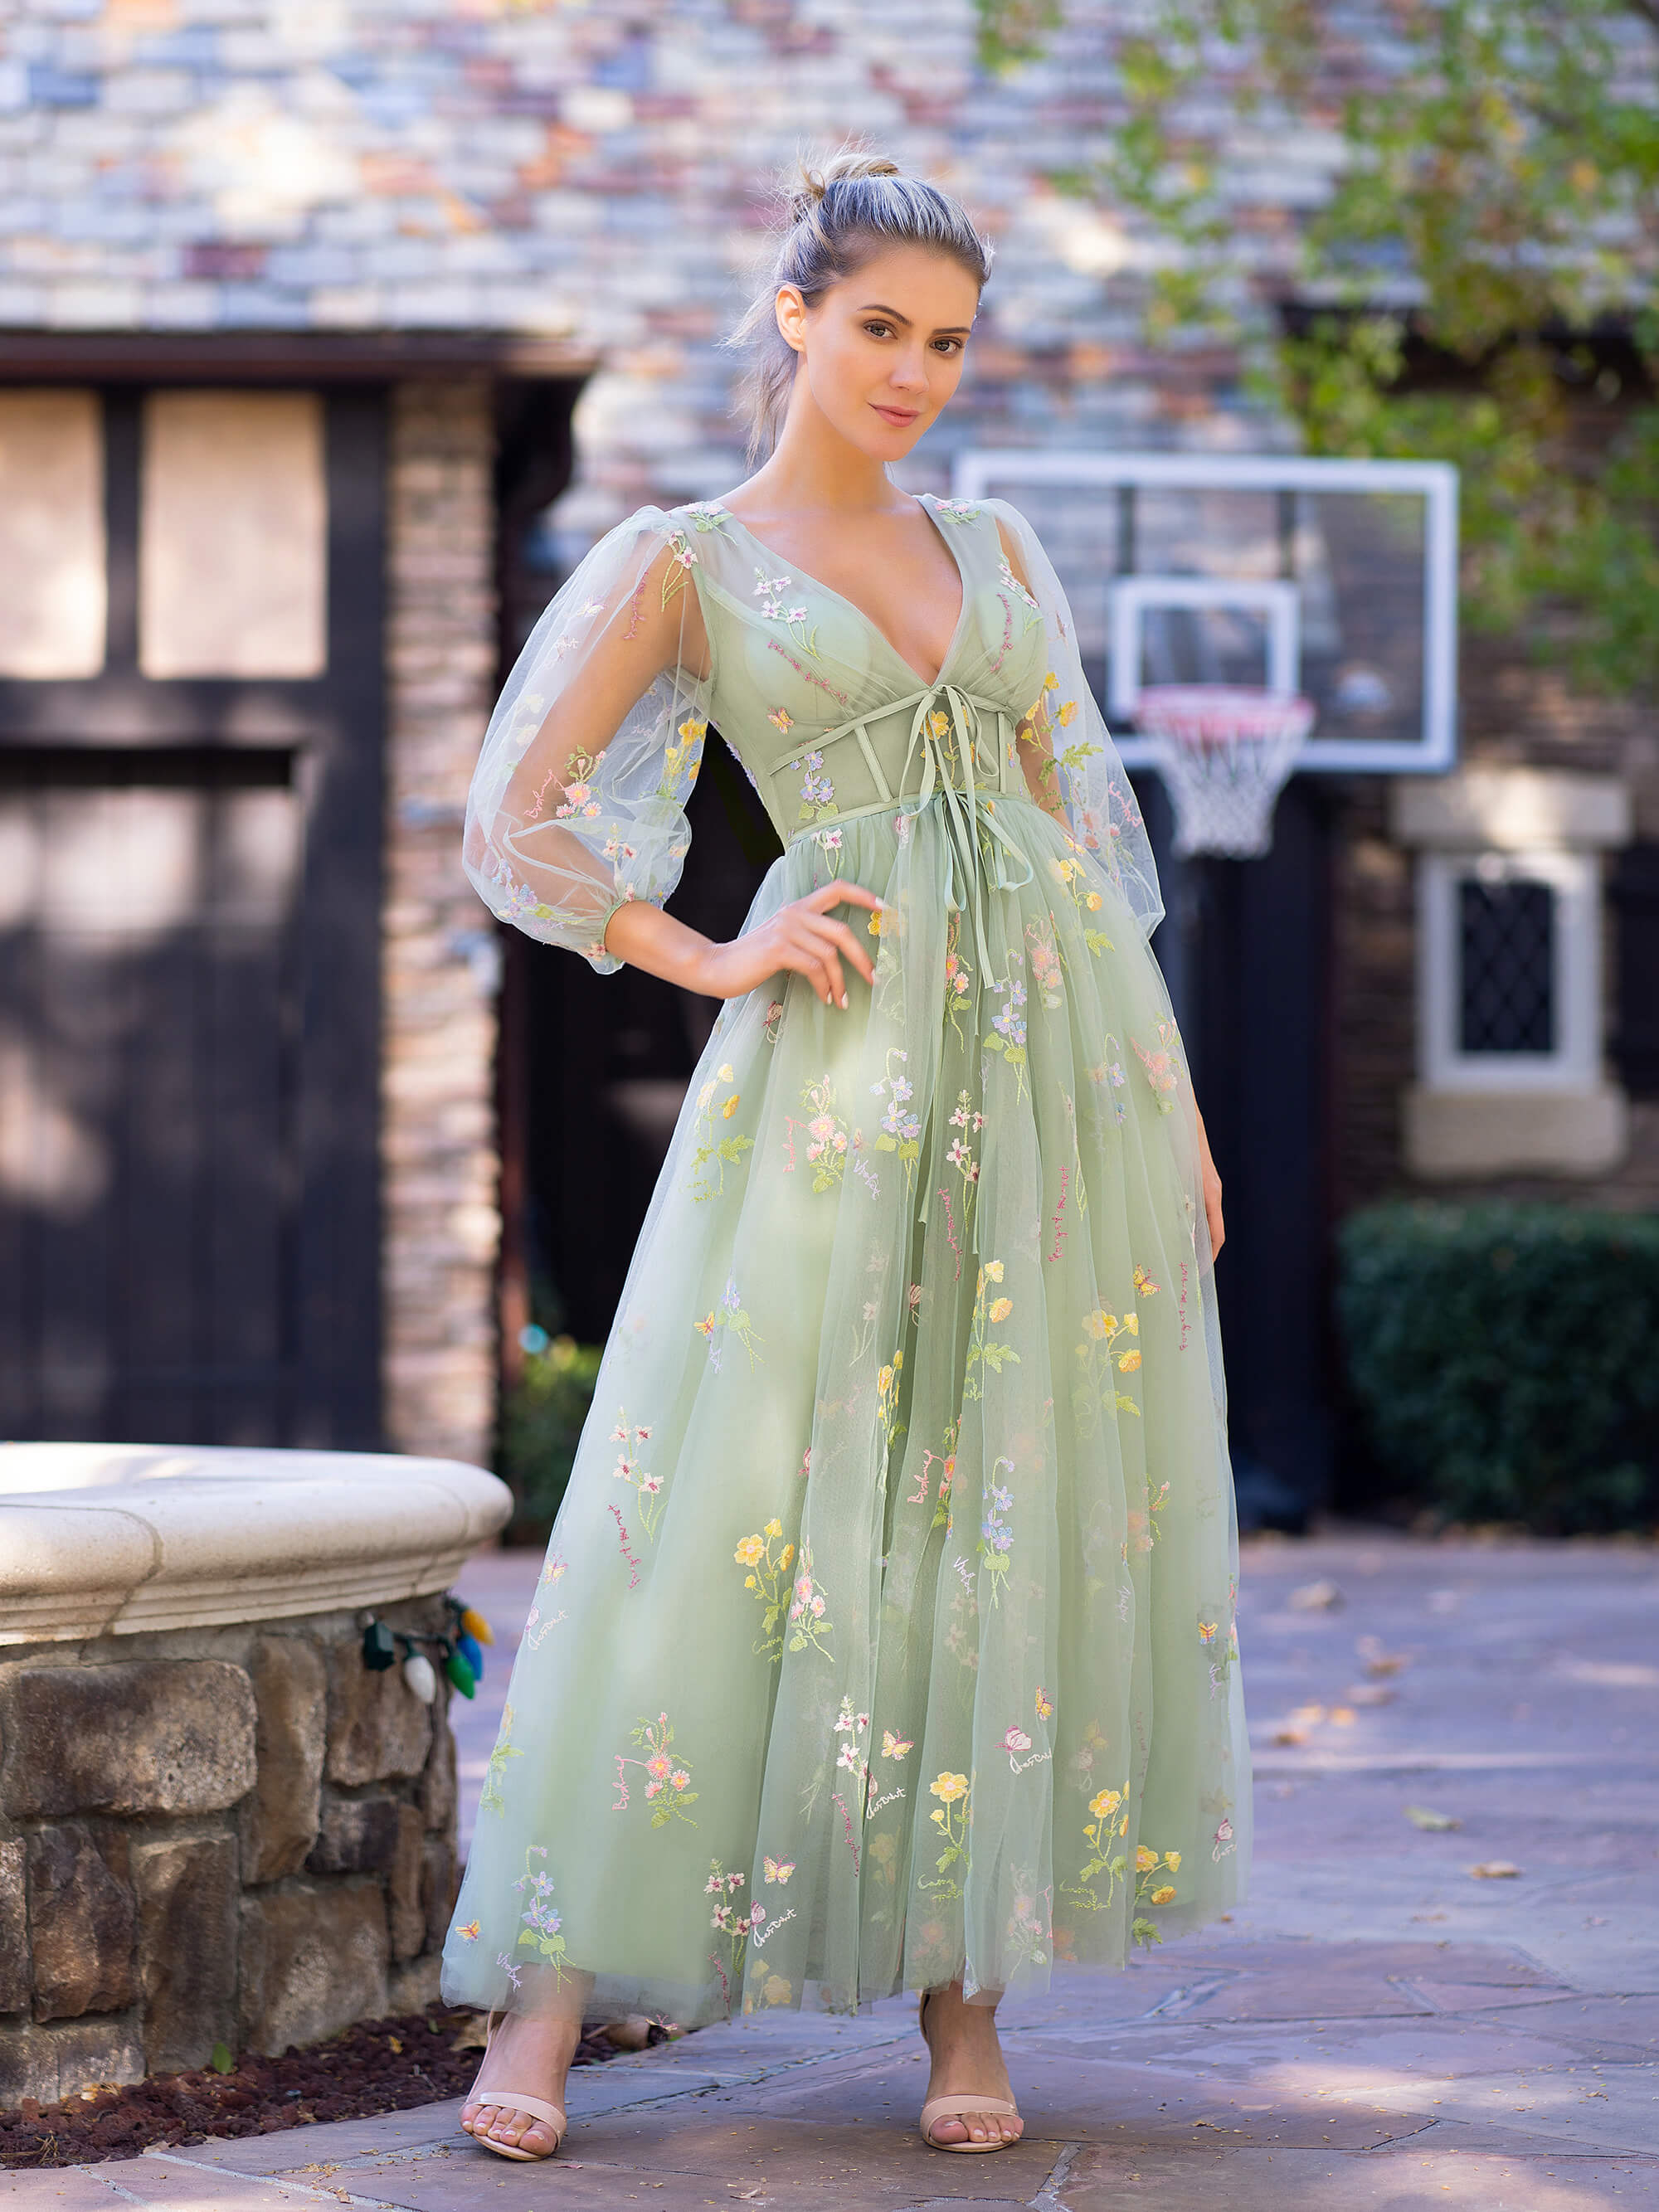 V-neck Embroidery Maxi Length Tulle Corset Floral Prom Dress